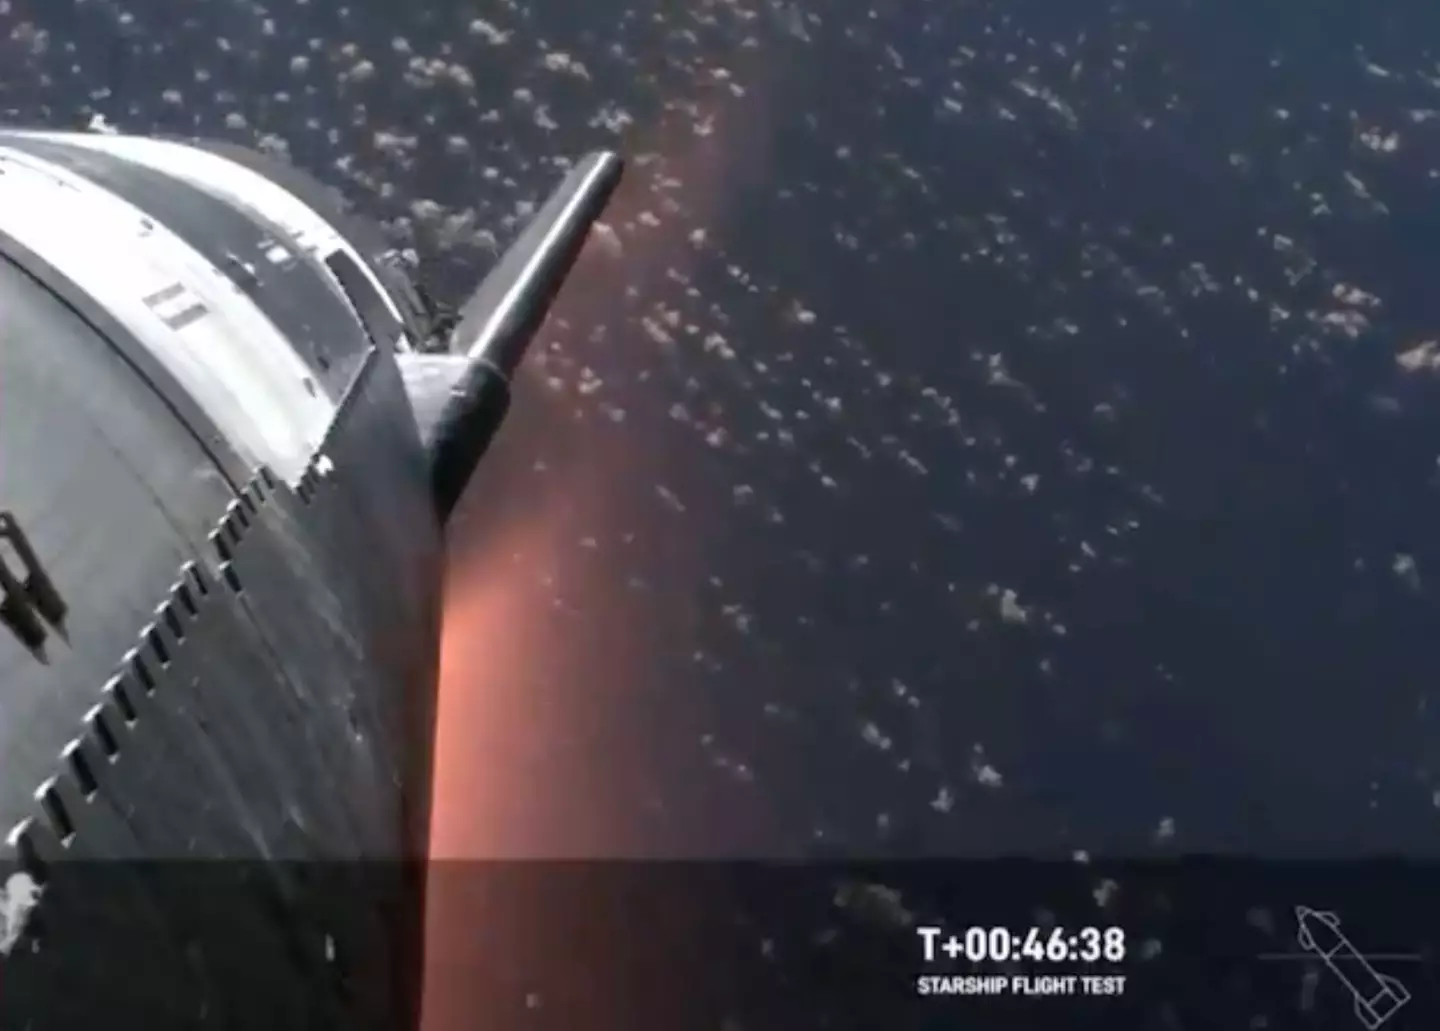 Space X was able to rejoice after its Starship successfully went to space and reentered Earth’s atmosphere.